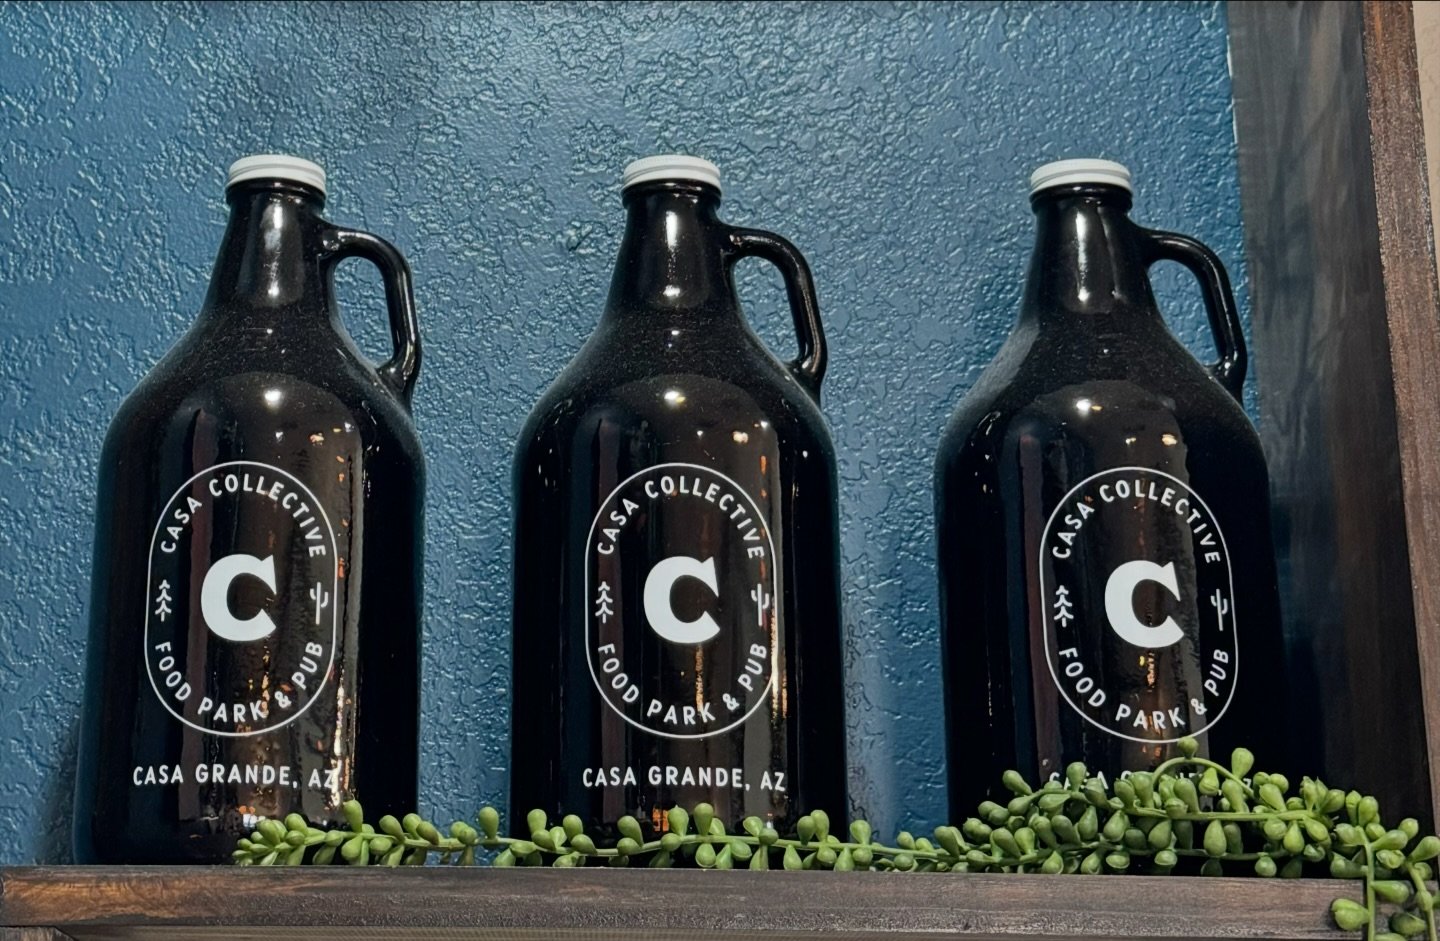 We are kicking off our Growler special this Sunday, April 28th. Join us on the last Sunday of every month and receive 50% off your fill when you purchase the Growler. Each month, you can bring in your Casa Collective growler for 50% off the fill of y